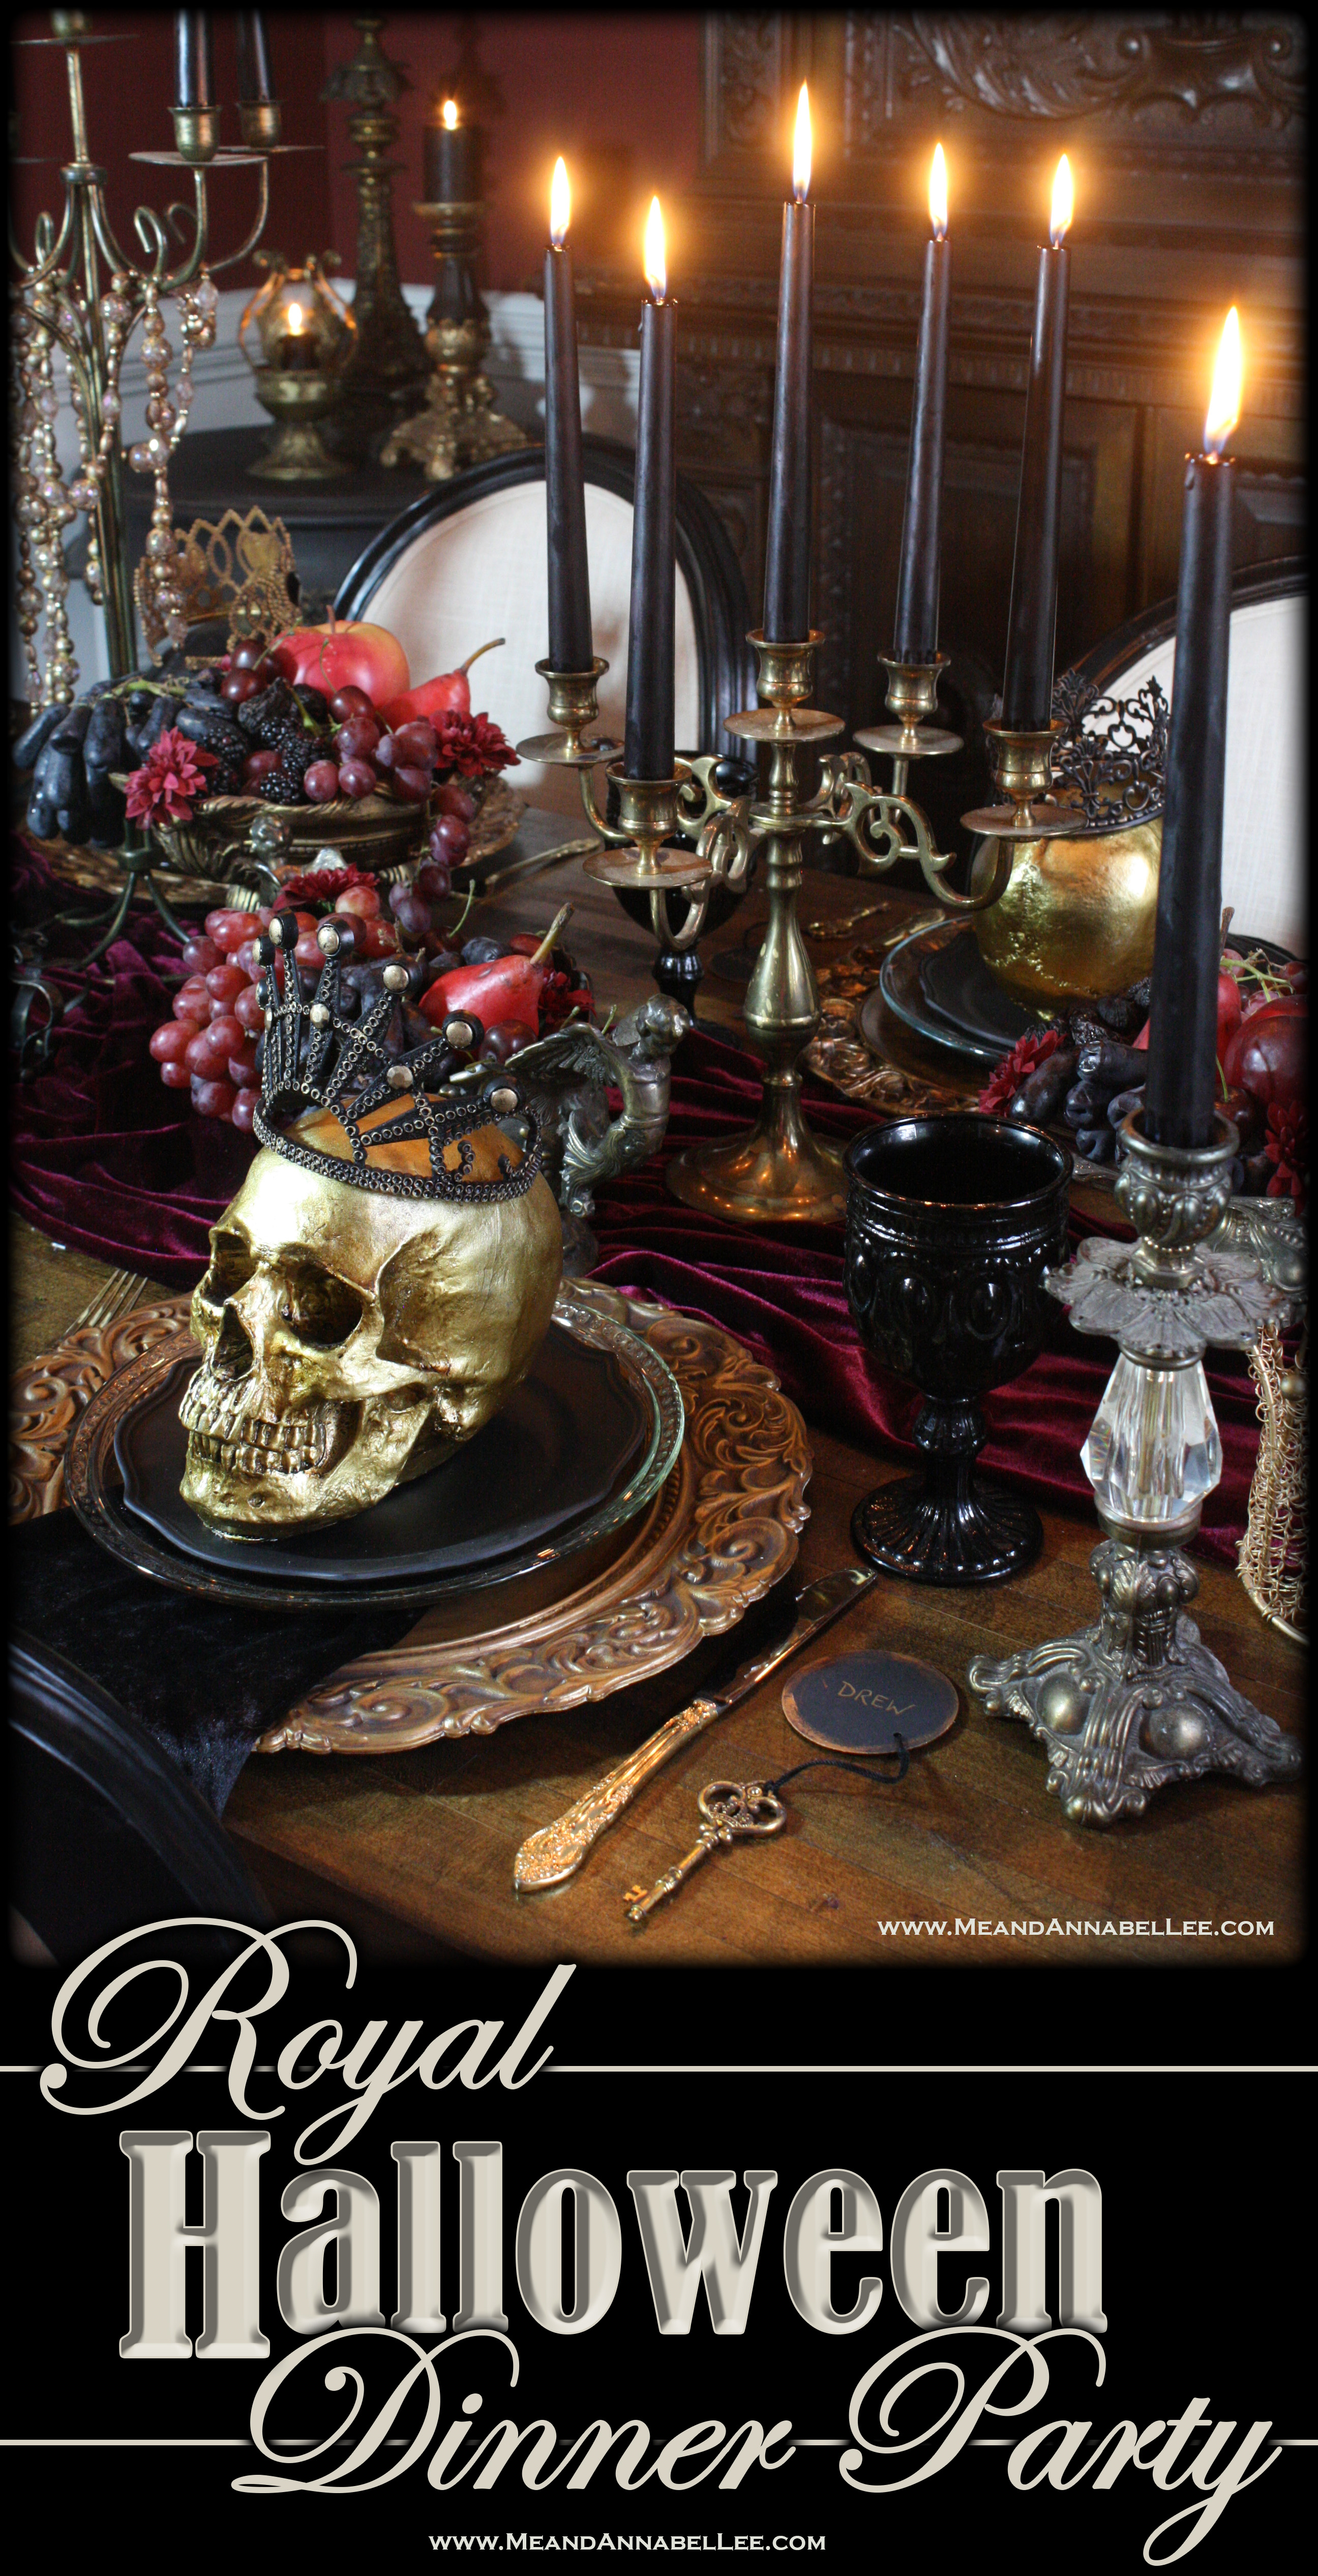 How to create a haunting yet luxurious Halloween Dinner Party fit for a Skull King or Queen… Burgundy Silk Velvet Table Runner, Antique Gold Candelabras, chunky gold candlesticks, Black Candles, Bowls of Dark Fruits, Black Velvet Linens, Gothic Black Glass Goblets, and Black and Gold Skulls wearing crowns | Me and Annabel Lee Blog